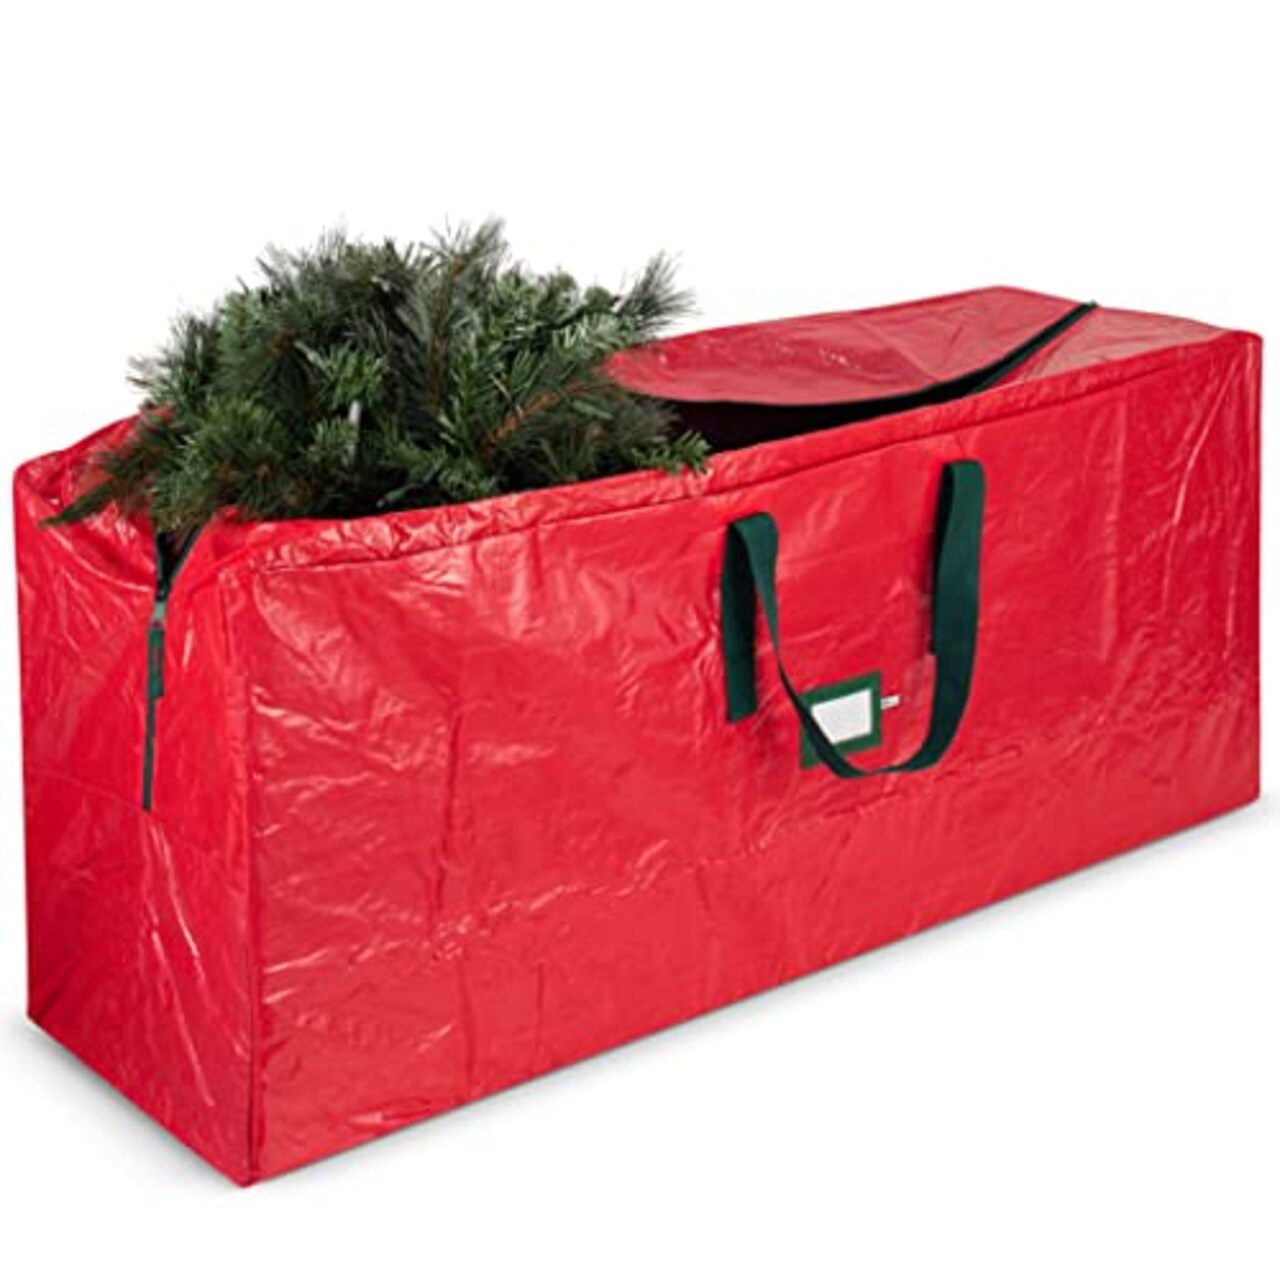 Zober Artificial Christmas Tree Storage Bag - Fits Up to 7.5 Foot Holiday Xmas Disassembled Trees with Durable Reinforced Handles &#x26; Dual Zipper - Waterproof Material Protects from Dust, Moisture &#x26; Insects (Red)